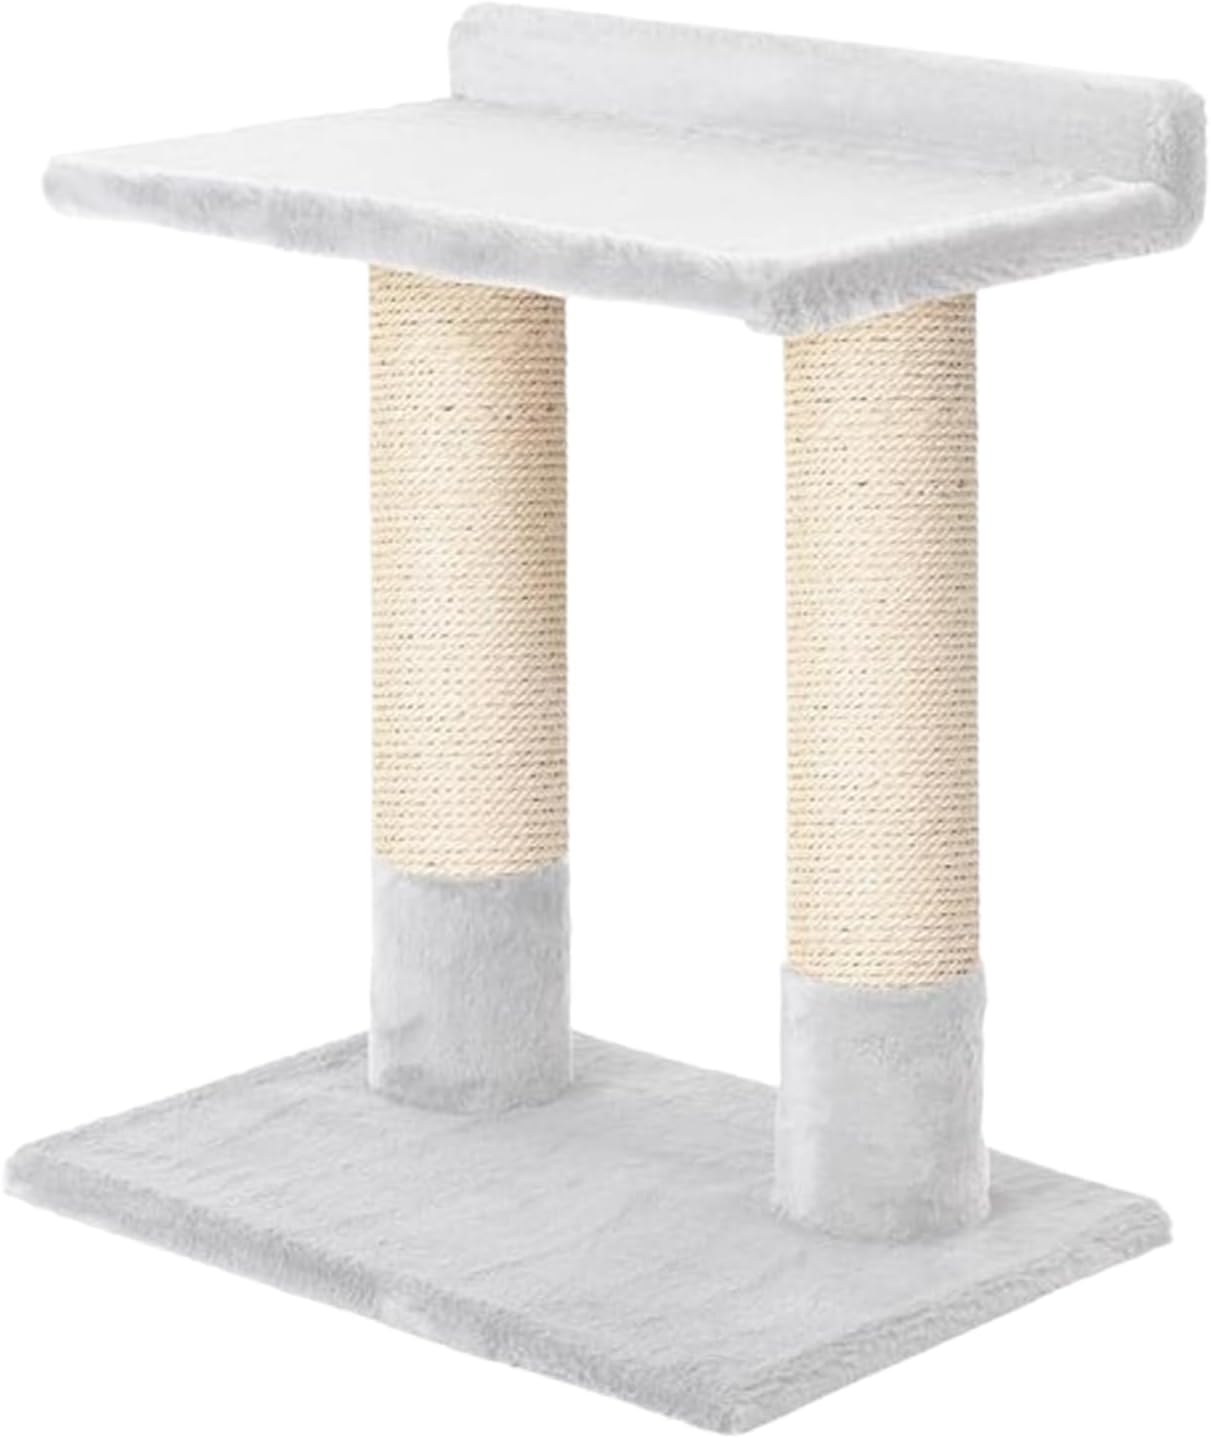 24 Inch Classic Comfort for Indoor Modern Premium Cats and Kittens Scratcher Larger Base for Better Stability, (White, Natural)